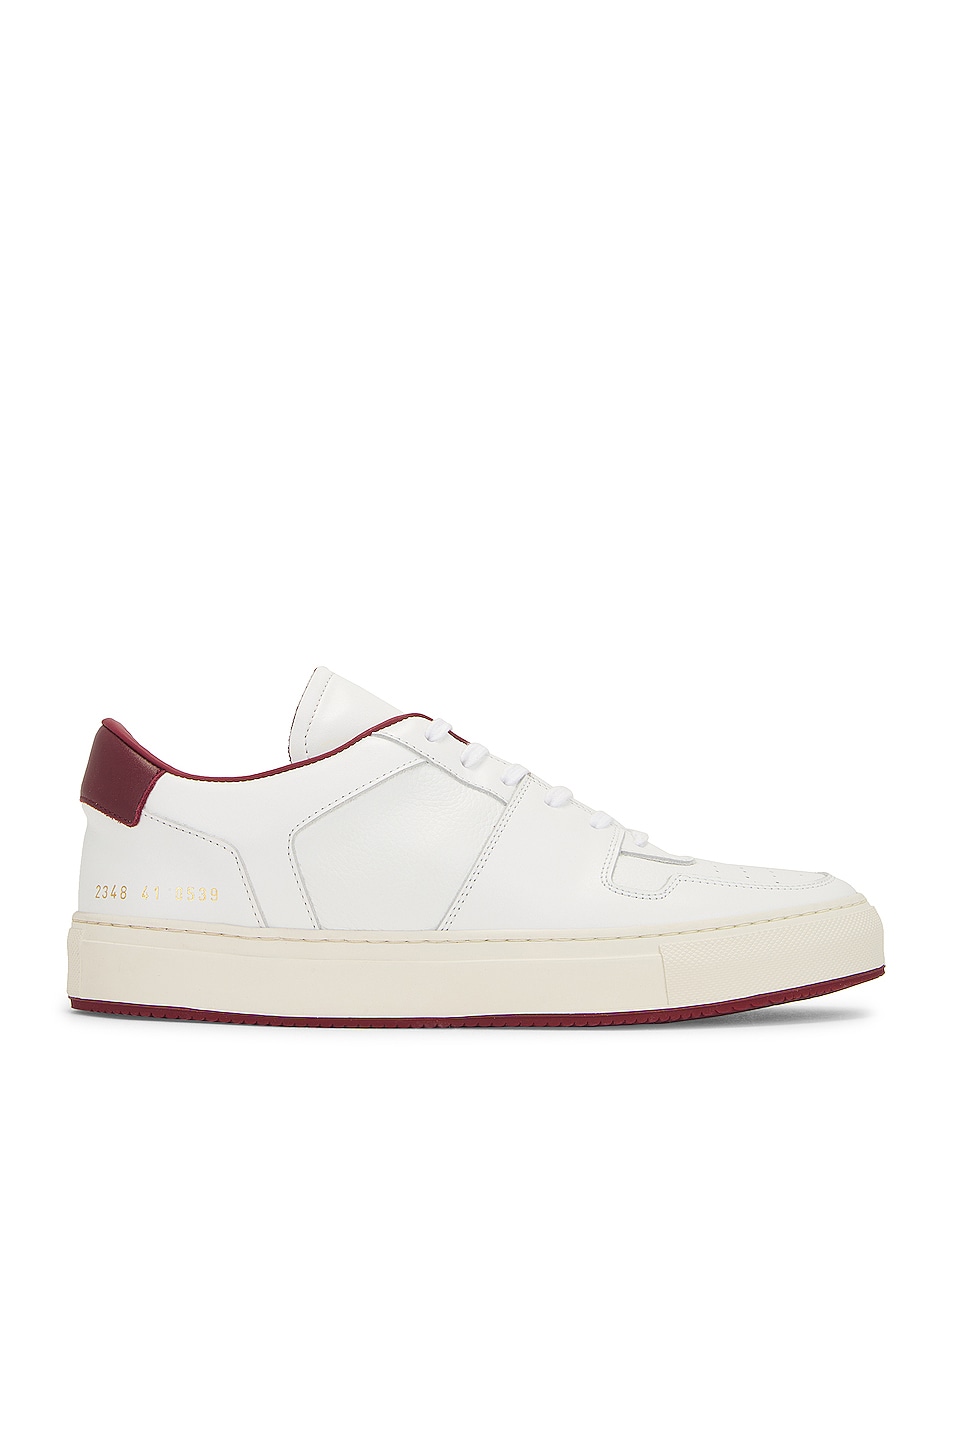 Image 1 of Common Projects Decades Low Article 2348 in White & Red